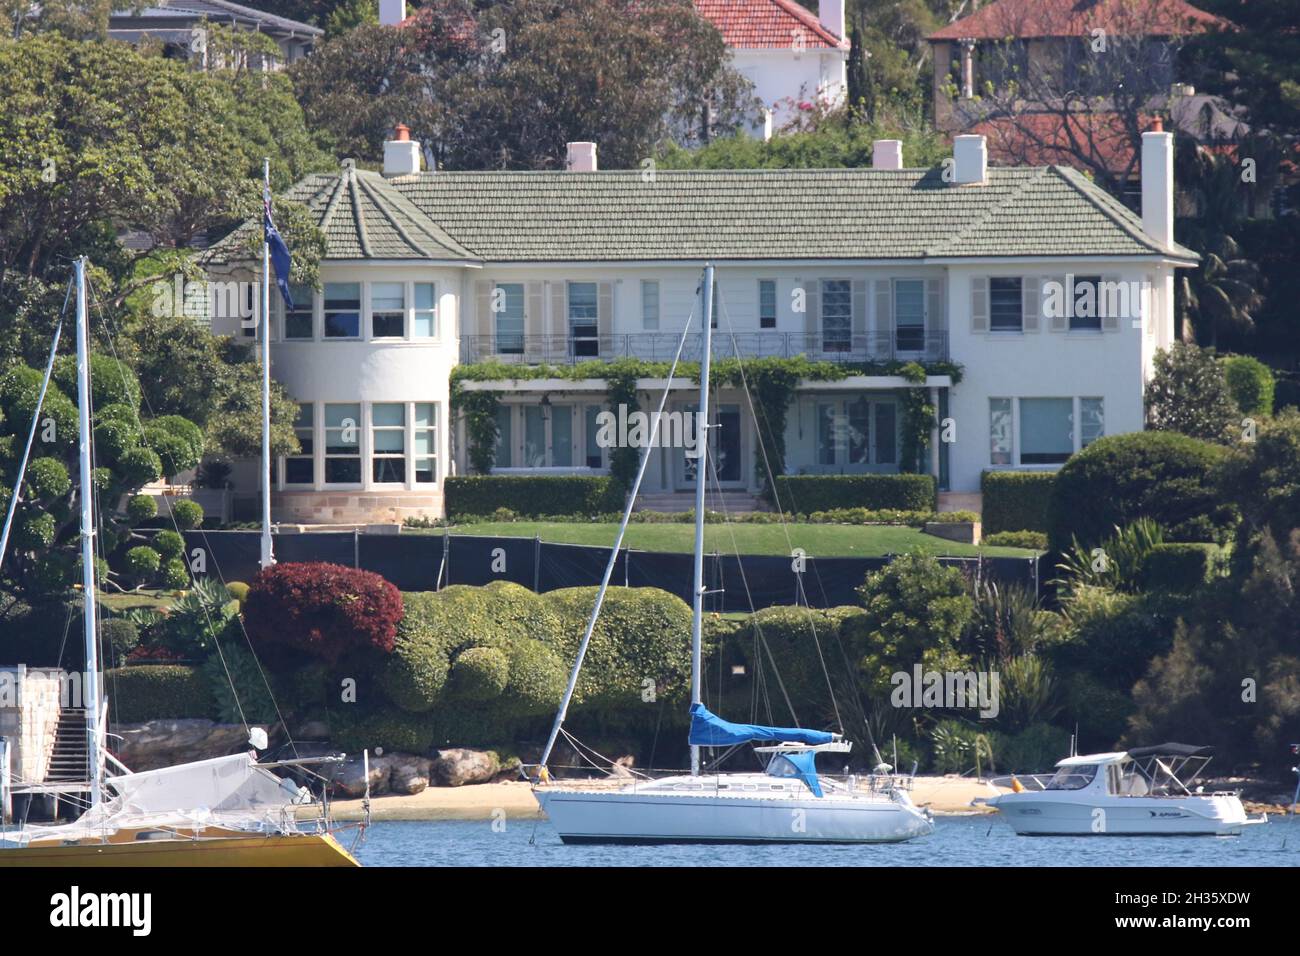 Sydney, Australia. 26th October 2021. American actress Julie will quarantine at a mansion at 25 Coolong Road, Vaucluse ahead of filming romantic comedy Ticket to Paradise in Queensland alongside George Clooney.